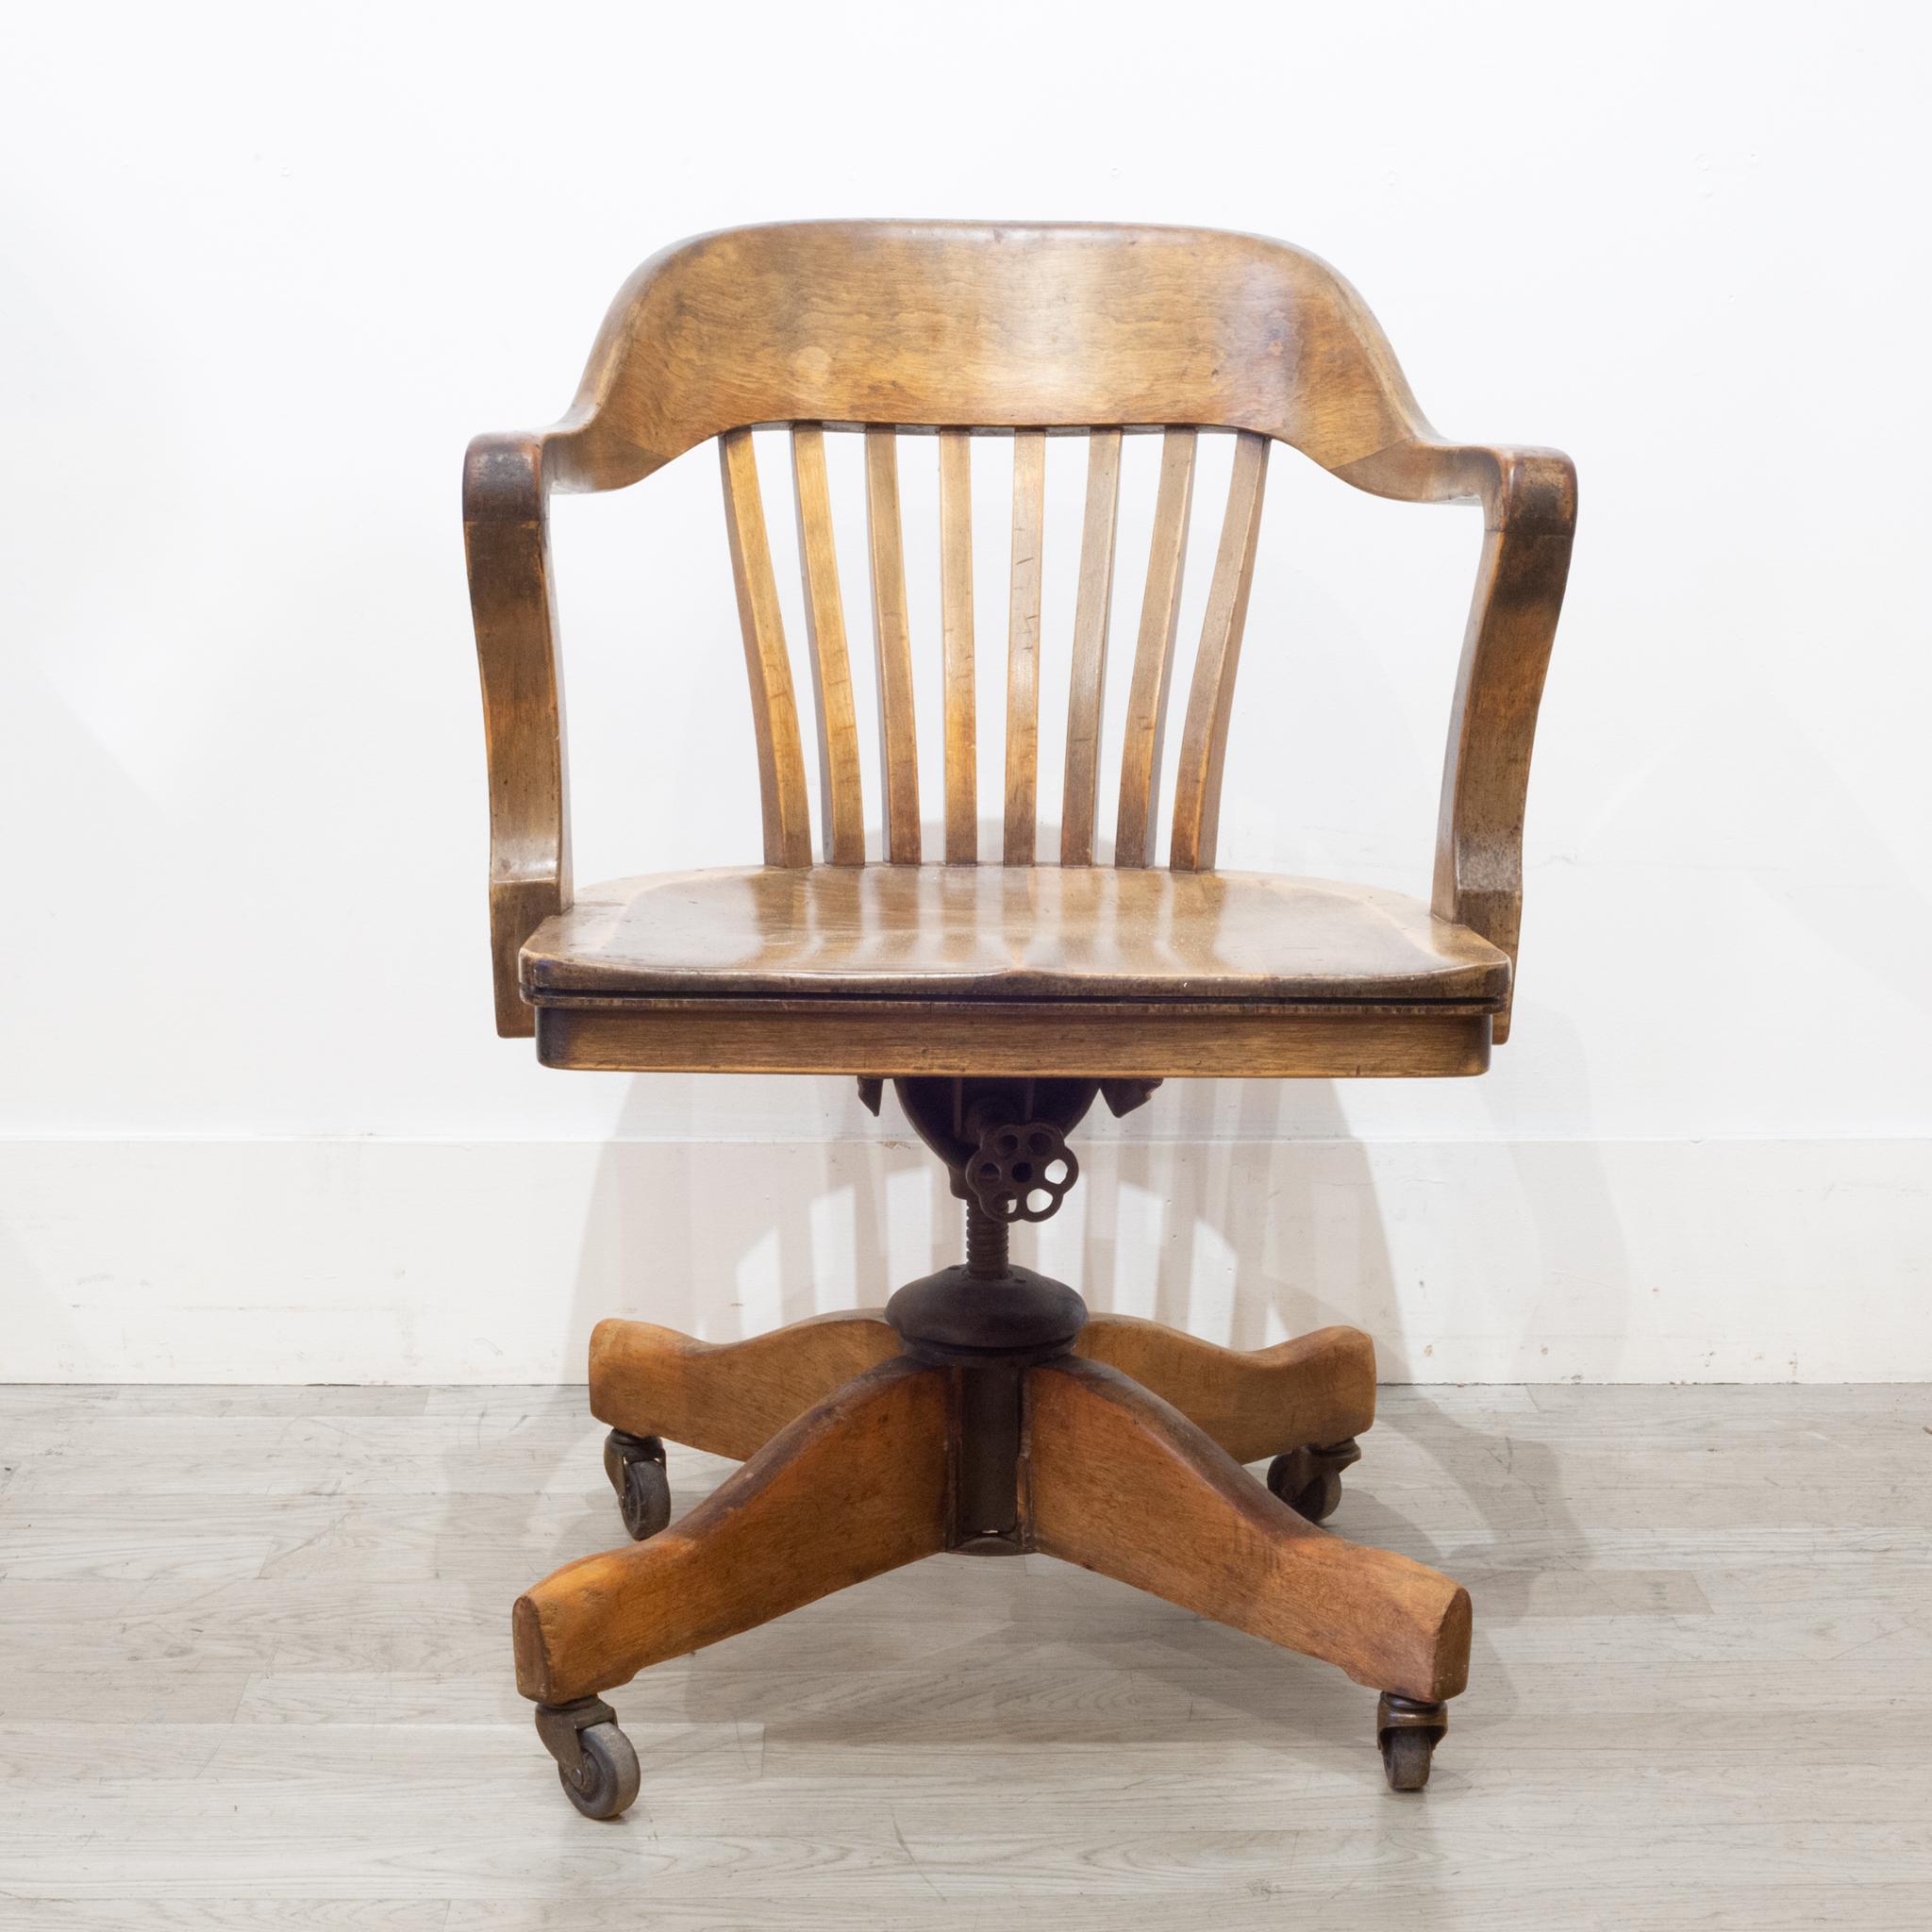 ABOUT

This is an original solid Oak desk chair with brass casters and cast iron mechanism. This chair swivels, tilts back and the height is adjustable. This chair has retained its original finish and has some structural damage.

    CREATOR